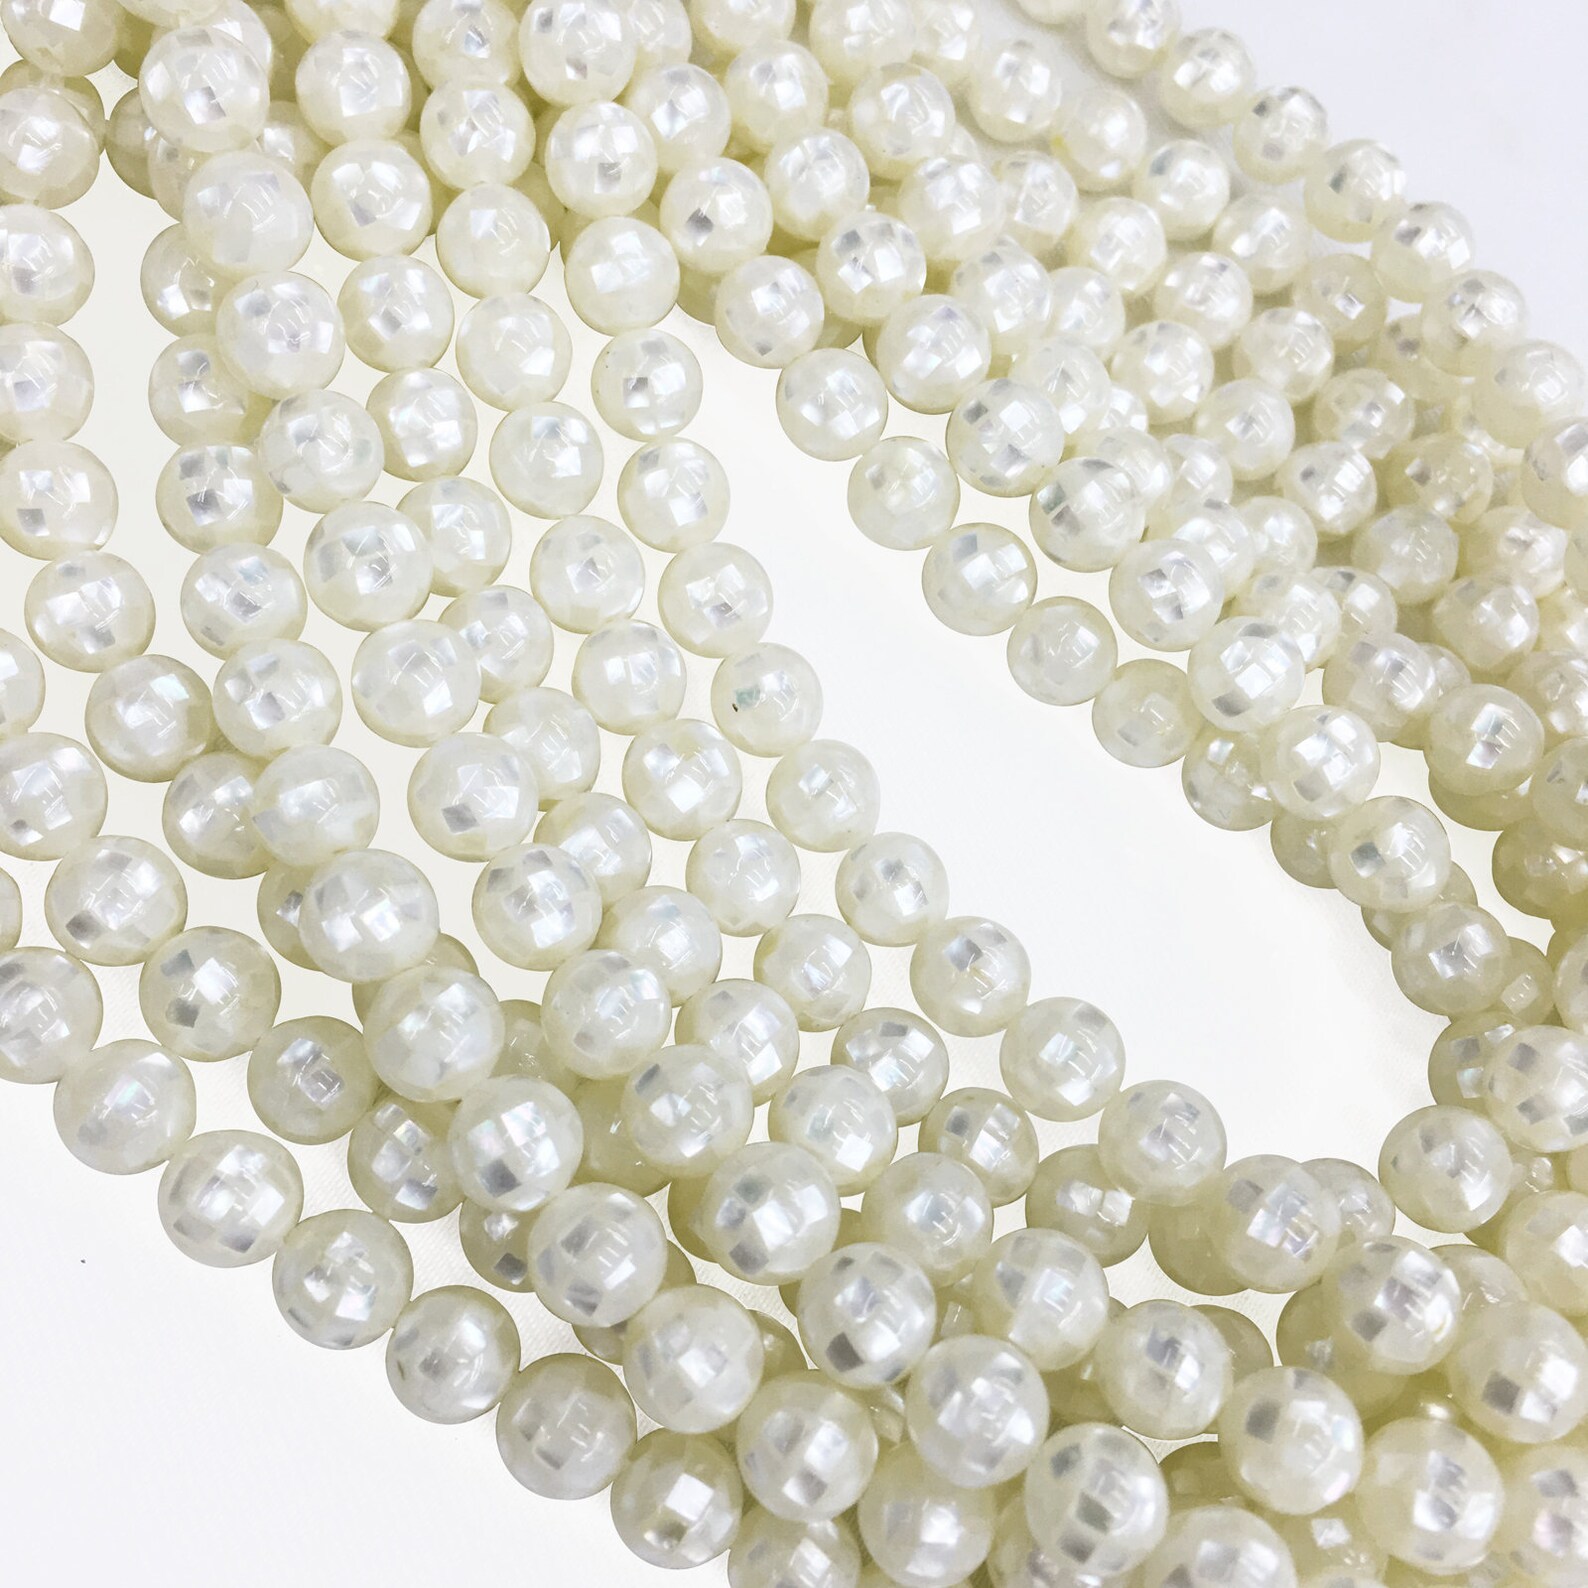 12mm White Mother of Pearl Round Beads Pearl Mosaic Beads - Etsy